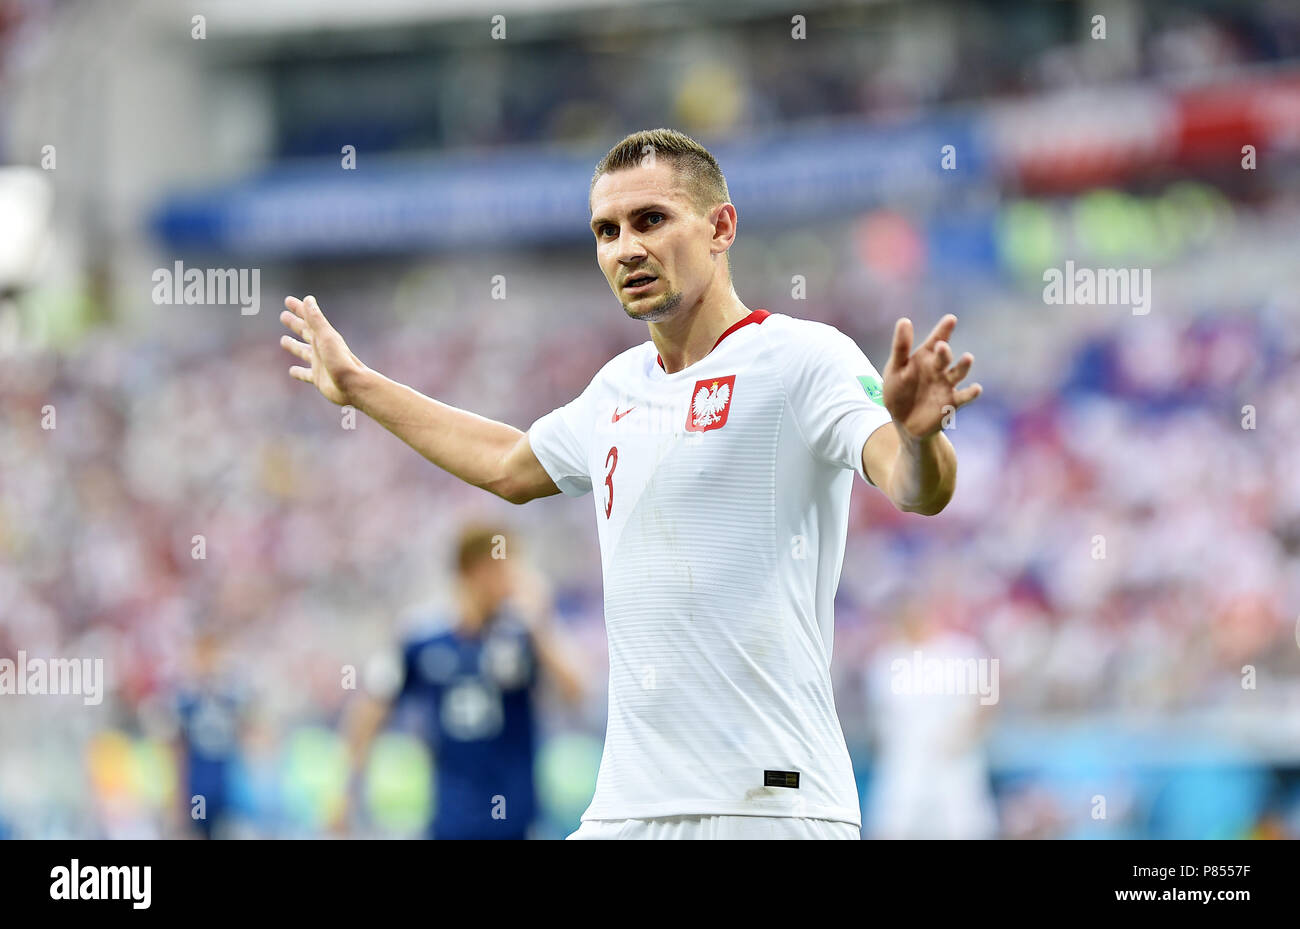 VOLGOGRAD, RUSSIA - JUNE 28: Artur Jedrzejczyk of Poland reacts during the 2018 FIFA World Cup Russia group H match between Japan and Poland at Volgograd Arena on June 28, 2018 in Volgograd, Russia. (Photo by Lukasz Laskowski/PressFocus/MB Media/) Stock Photo